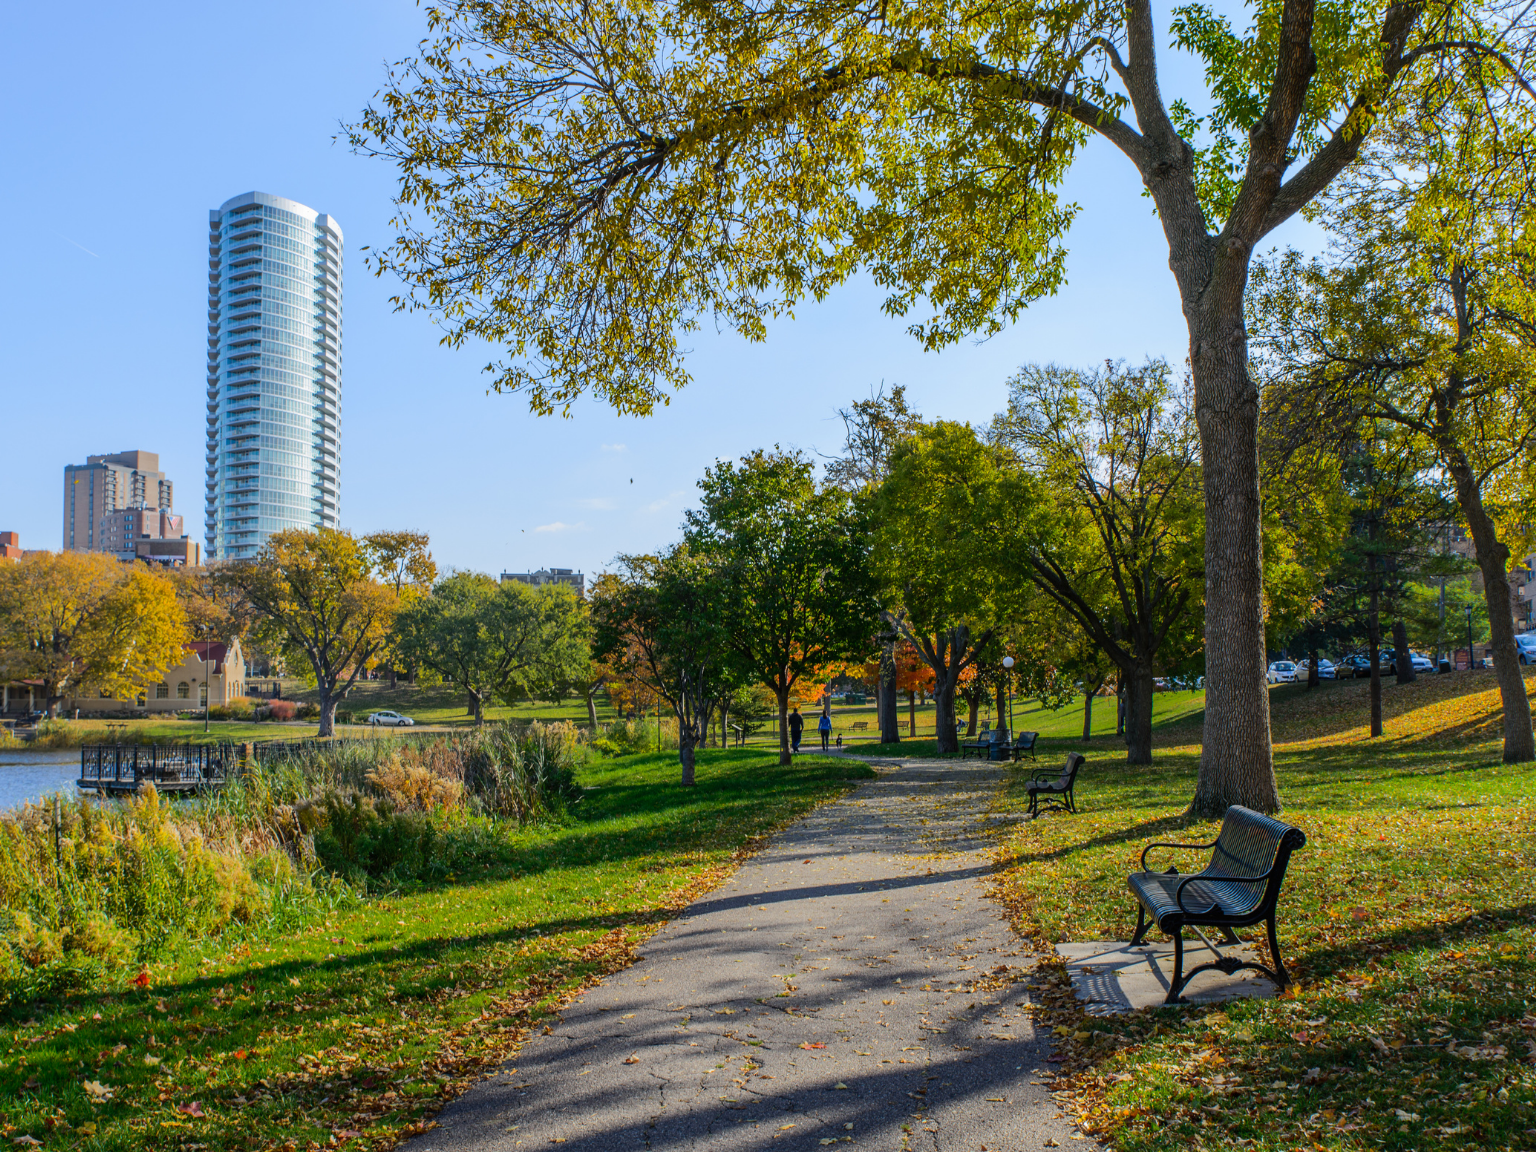 Park trail with a bench in the foreground and buildings in the background.